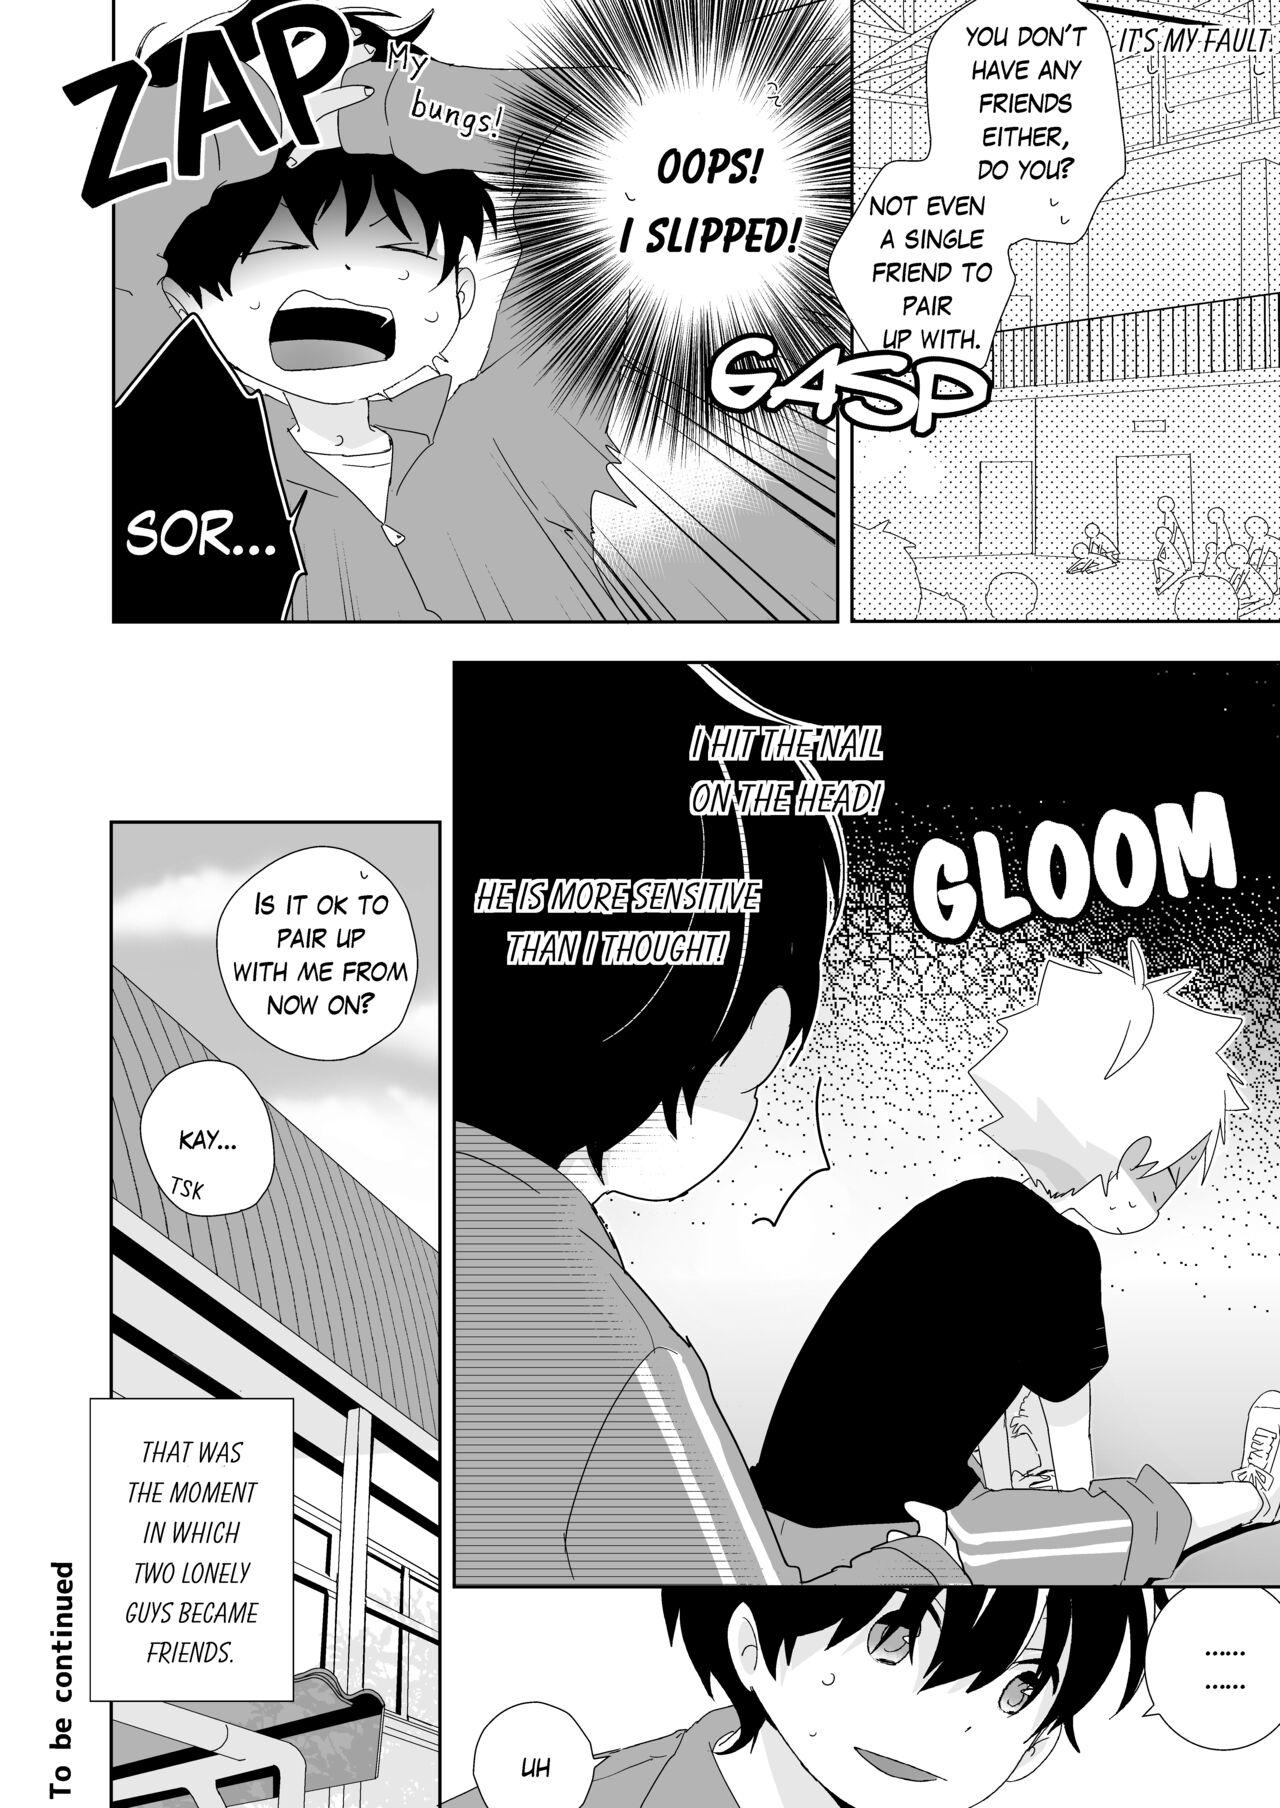 Best Blowjob [Naitama (Isako)] InCha-kun to Furyou-kun | The Troublemaker and the Nerd [English] - Original Pussy Fingering - Page 7